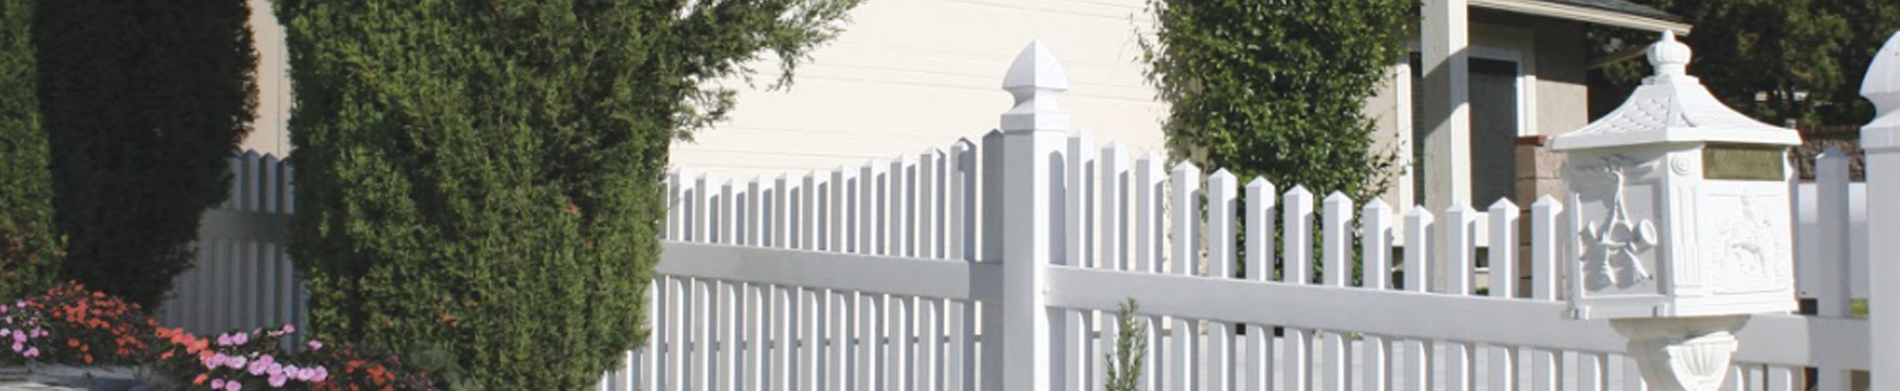 Why replace your fence easily and waste money? – Install a vinyl picket fence